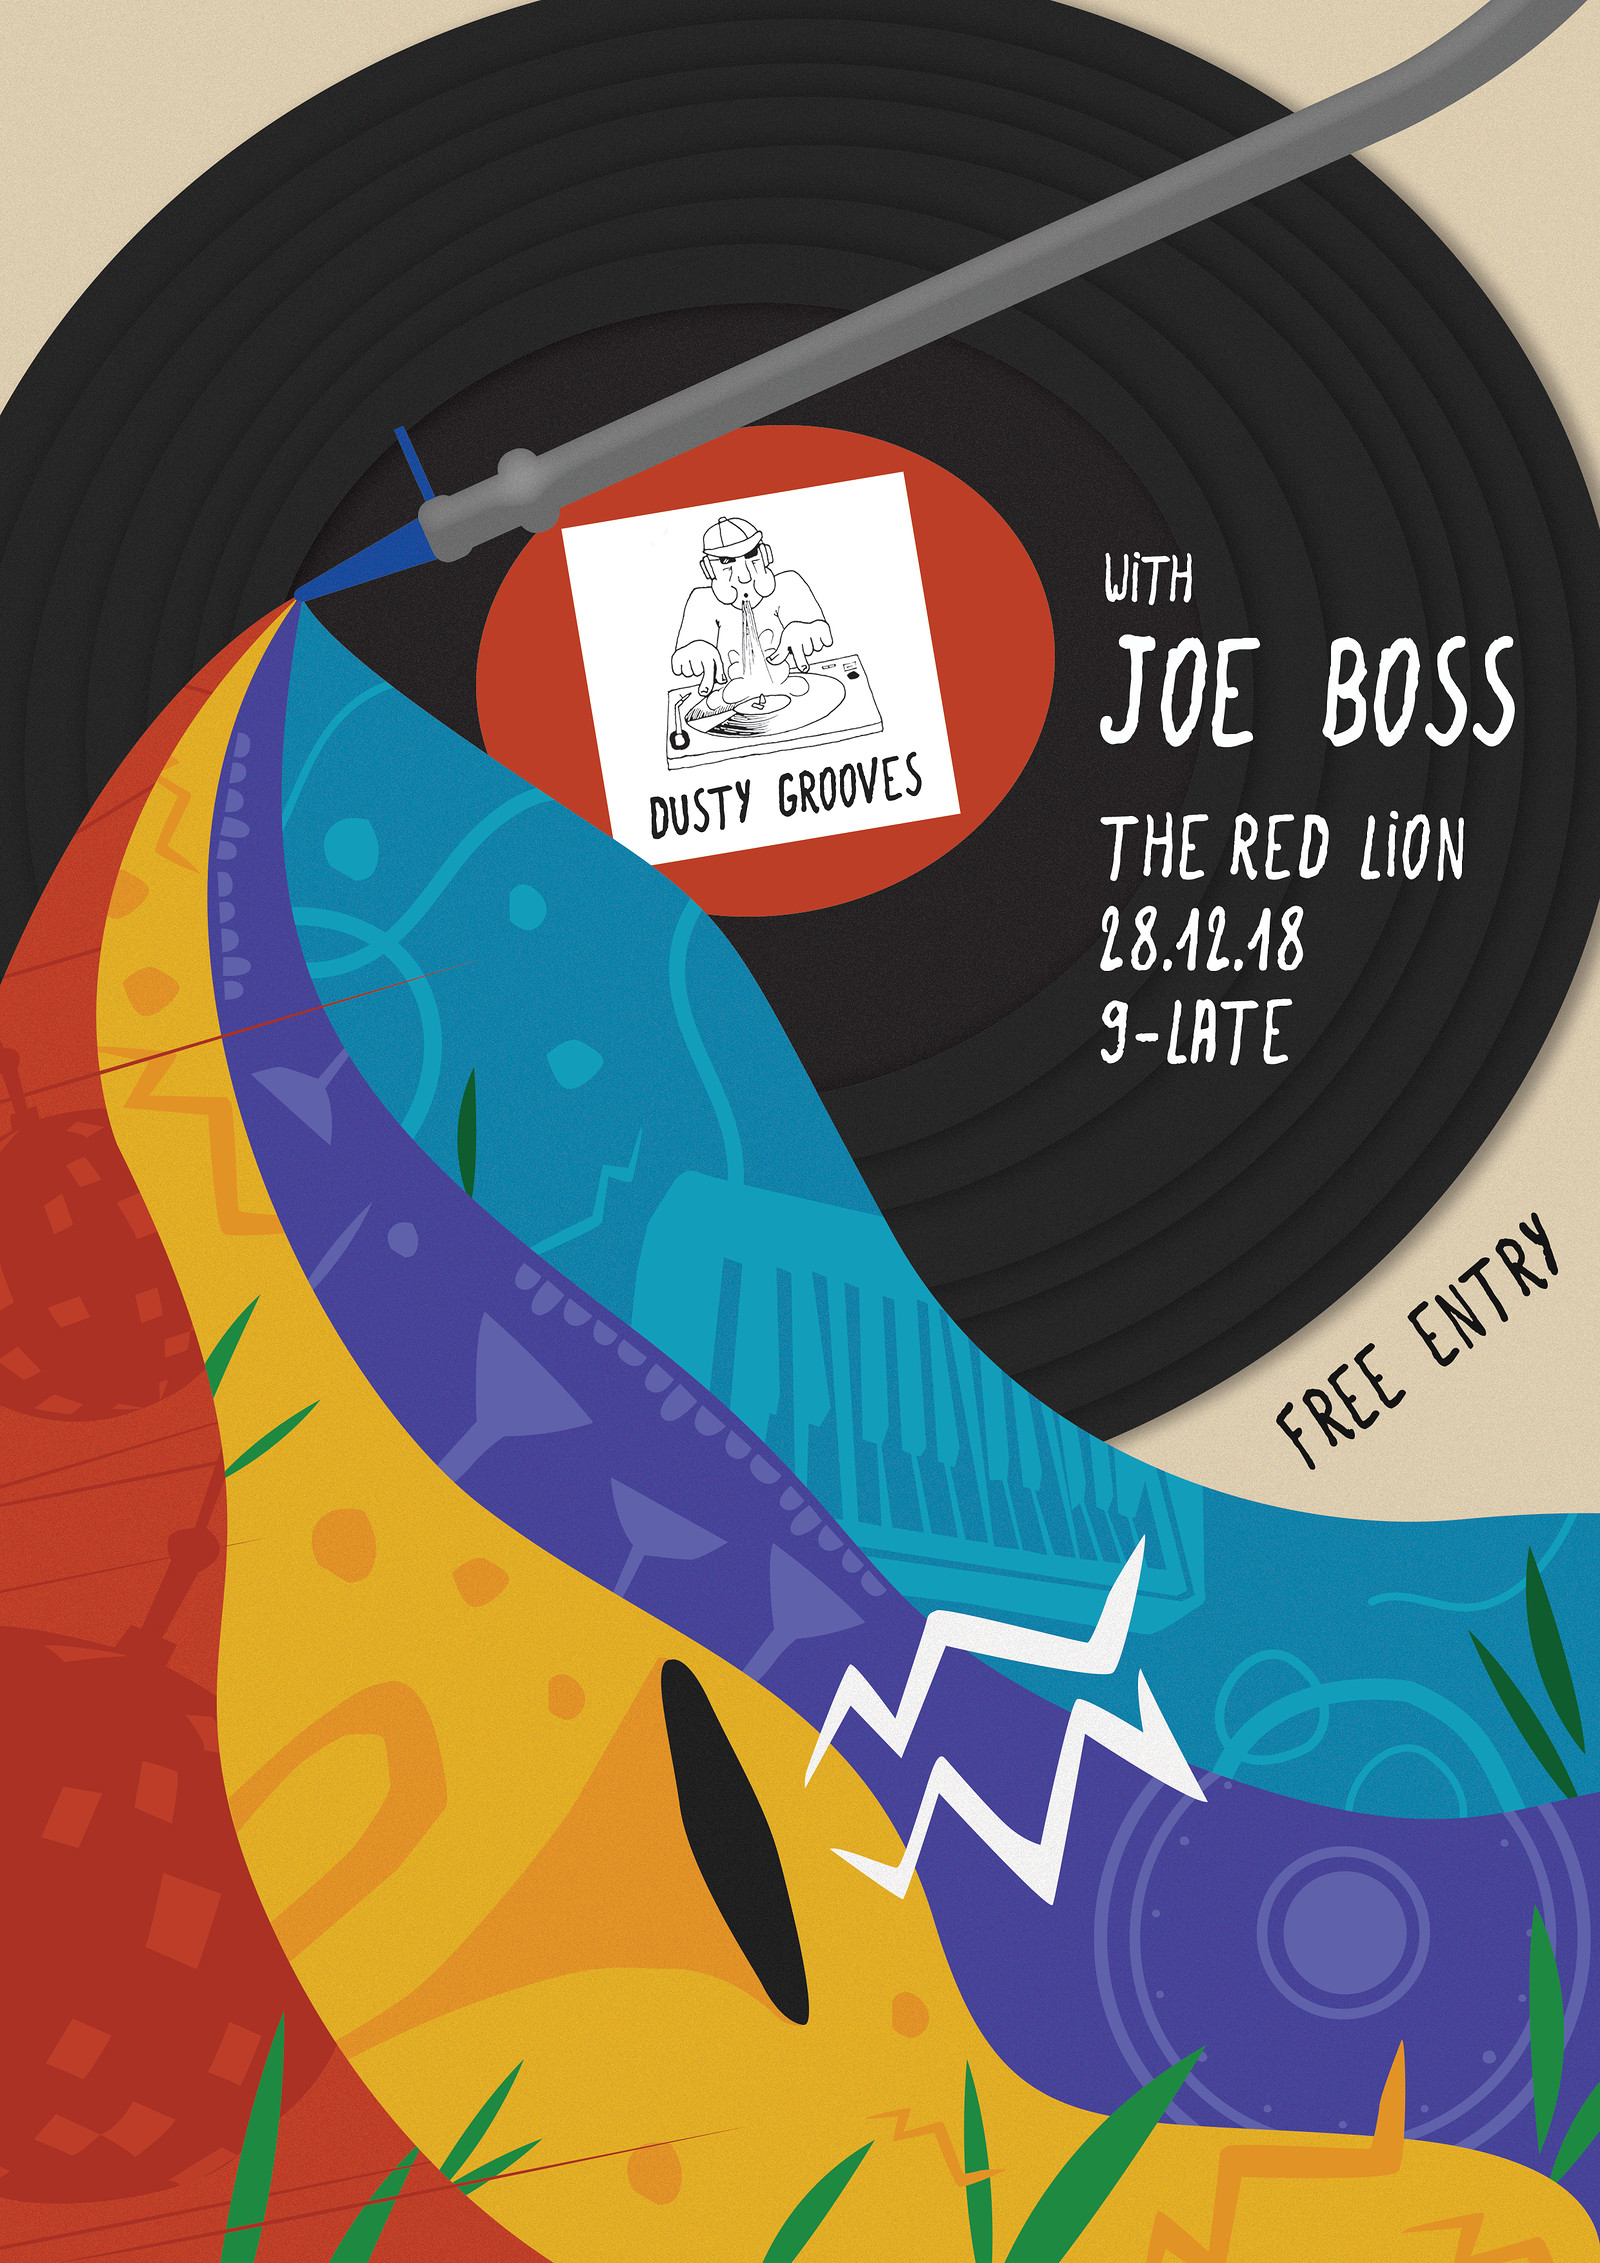 Dusty Grooves w/ Joe Boss at Red Lion, Whitehall Road